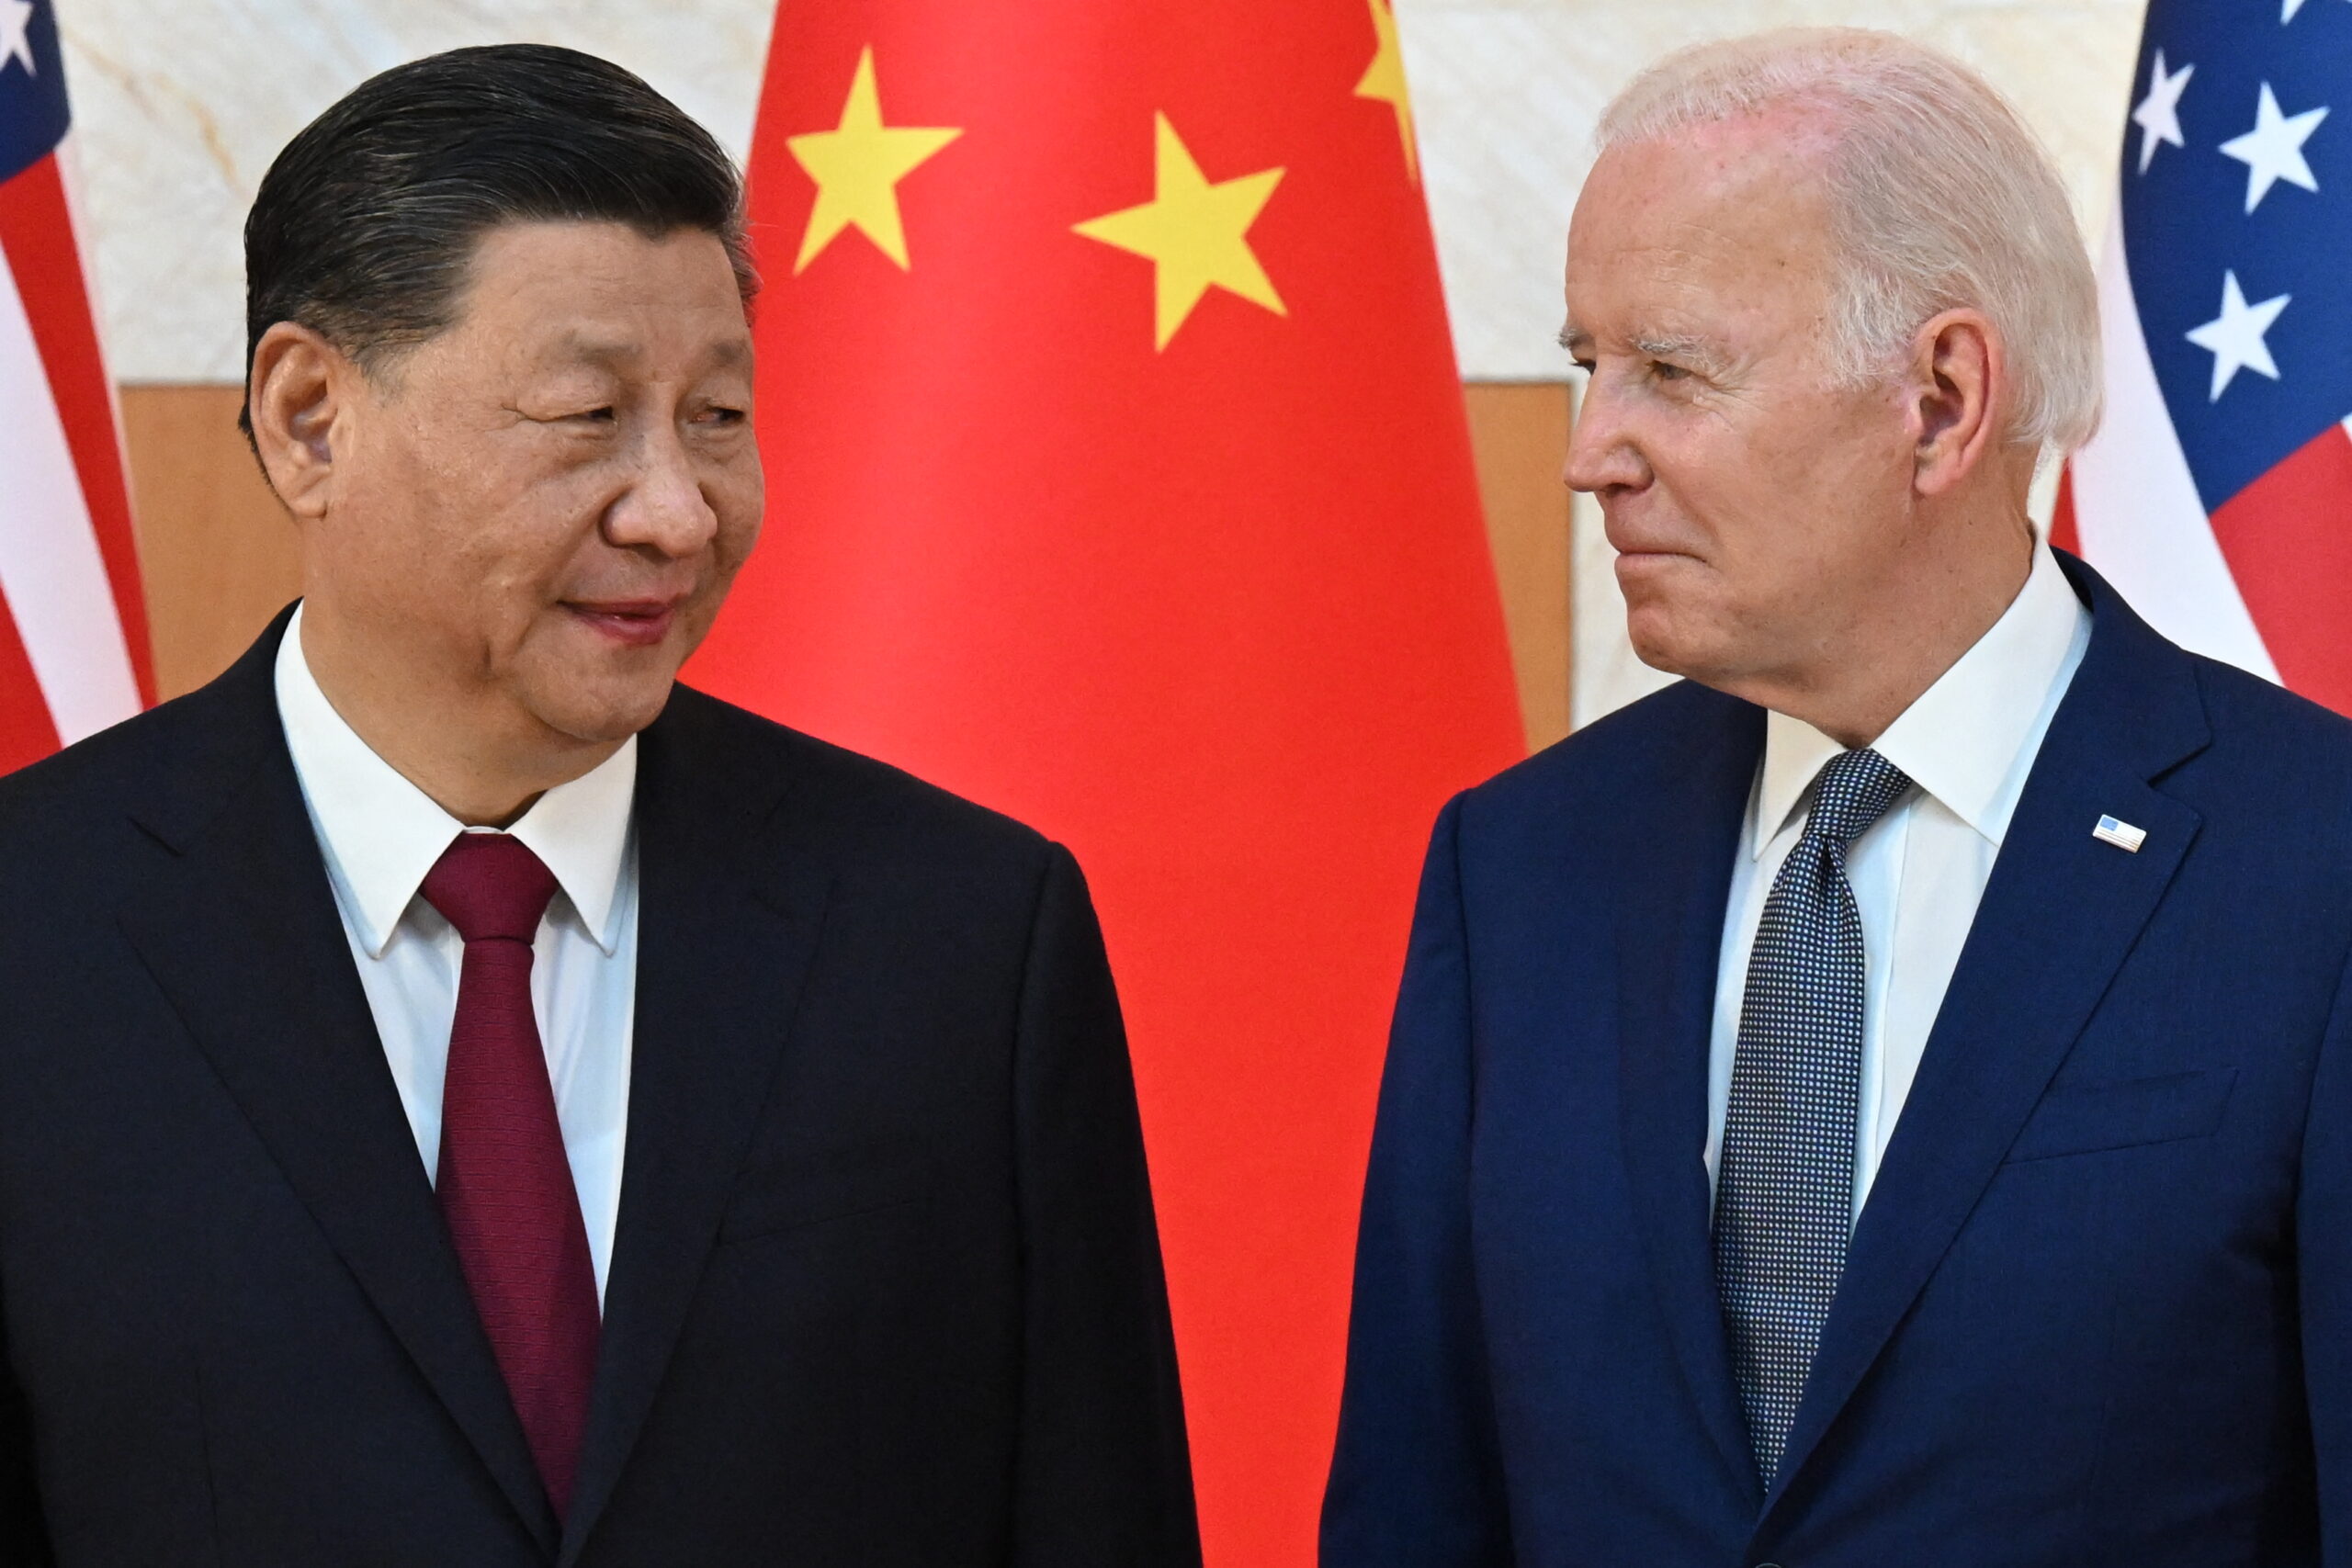 biden-to-hold-meeting-with-chinese-president-xi-jinping-in-san-francisco:-white-house